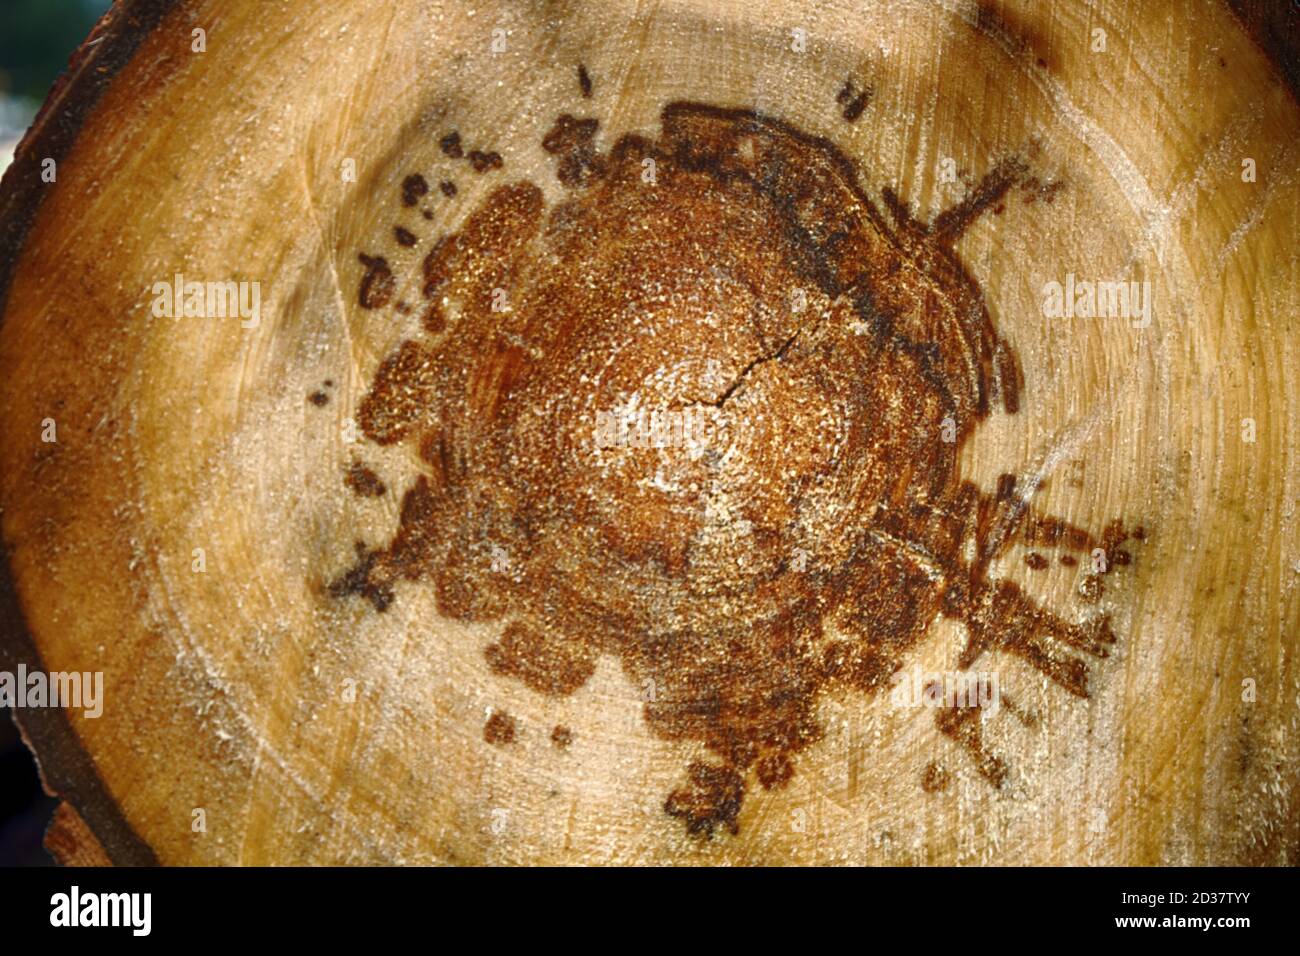 Aspen pith stock and heartwood rot (stem rot) - doted tree in forest products industry. Phytopathologies and tinder mushroom Phellinus tremulae negati Stock Photo